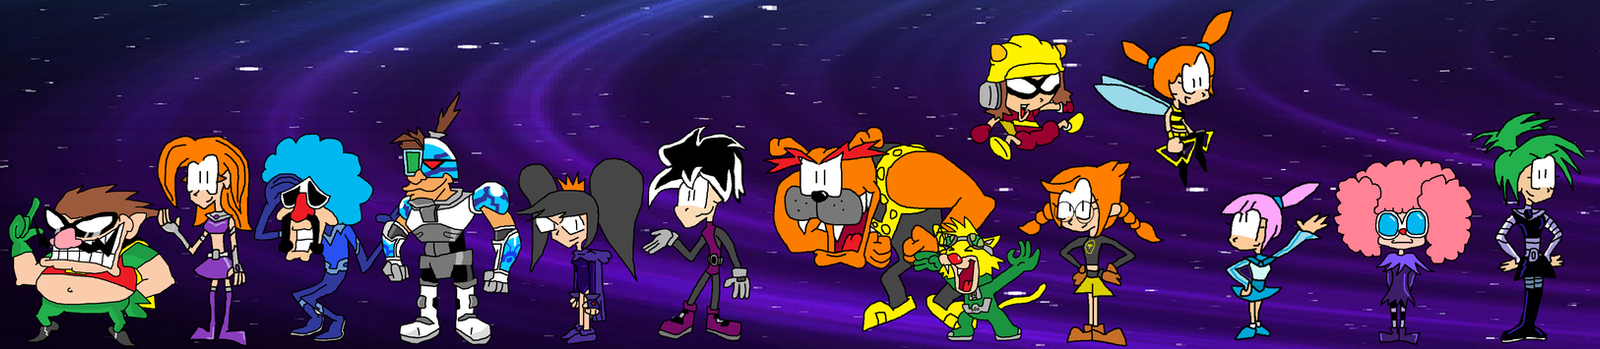 warioware_titans_by_wecato-d3e6cw0.png